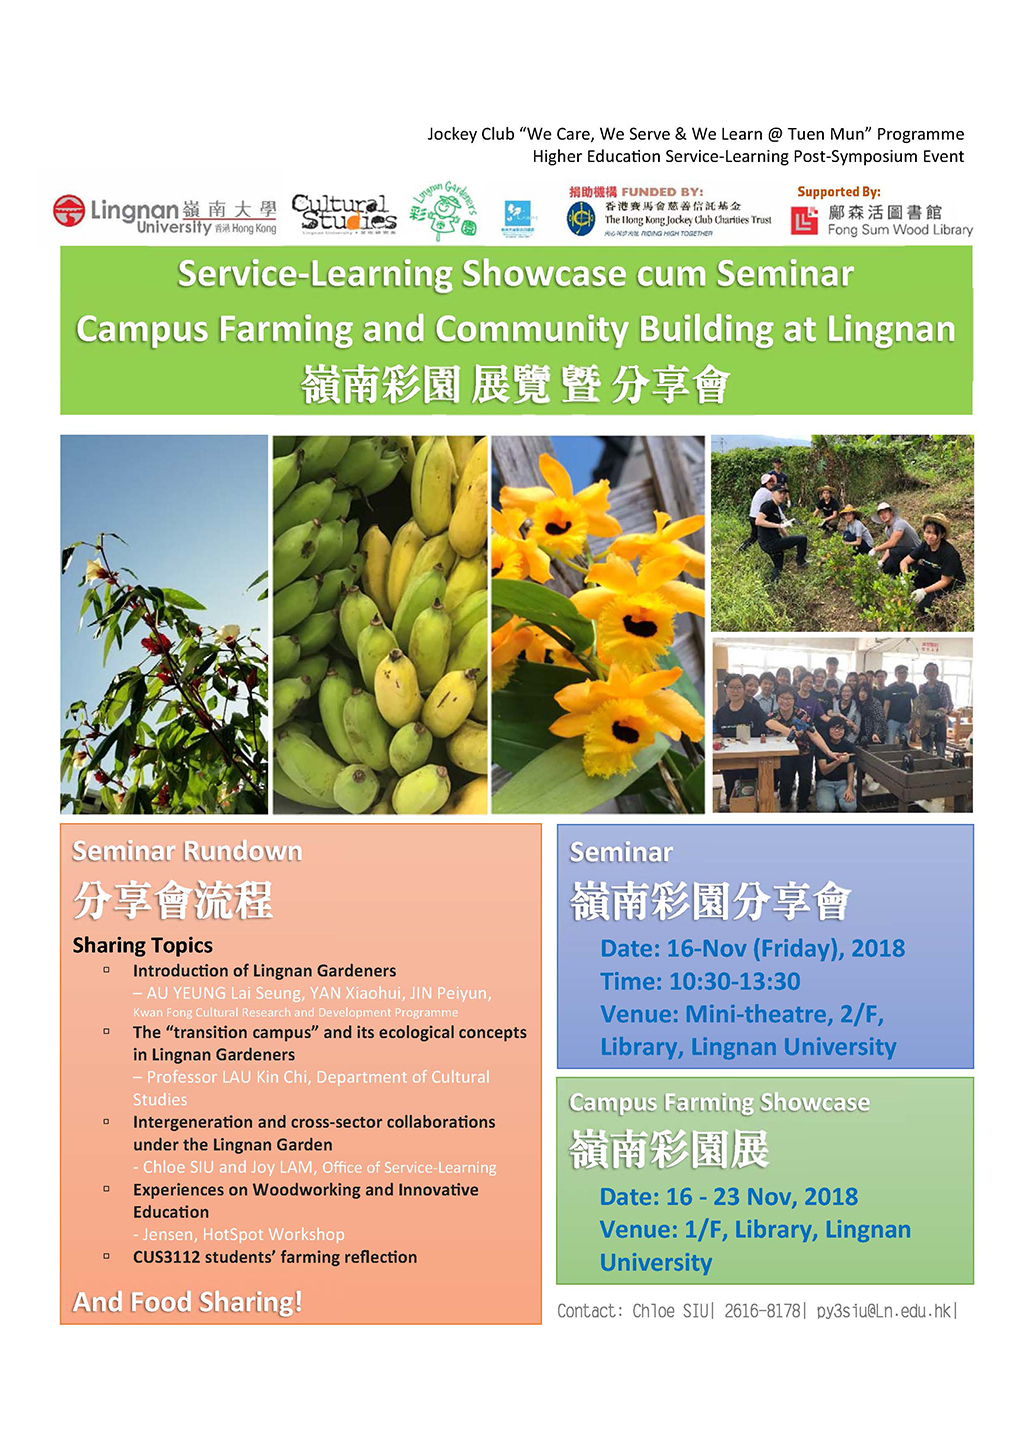 Exhibition of Service-learning showcase cum seminar — campus farming and community building at Lingnan